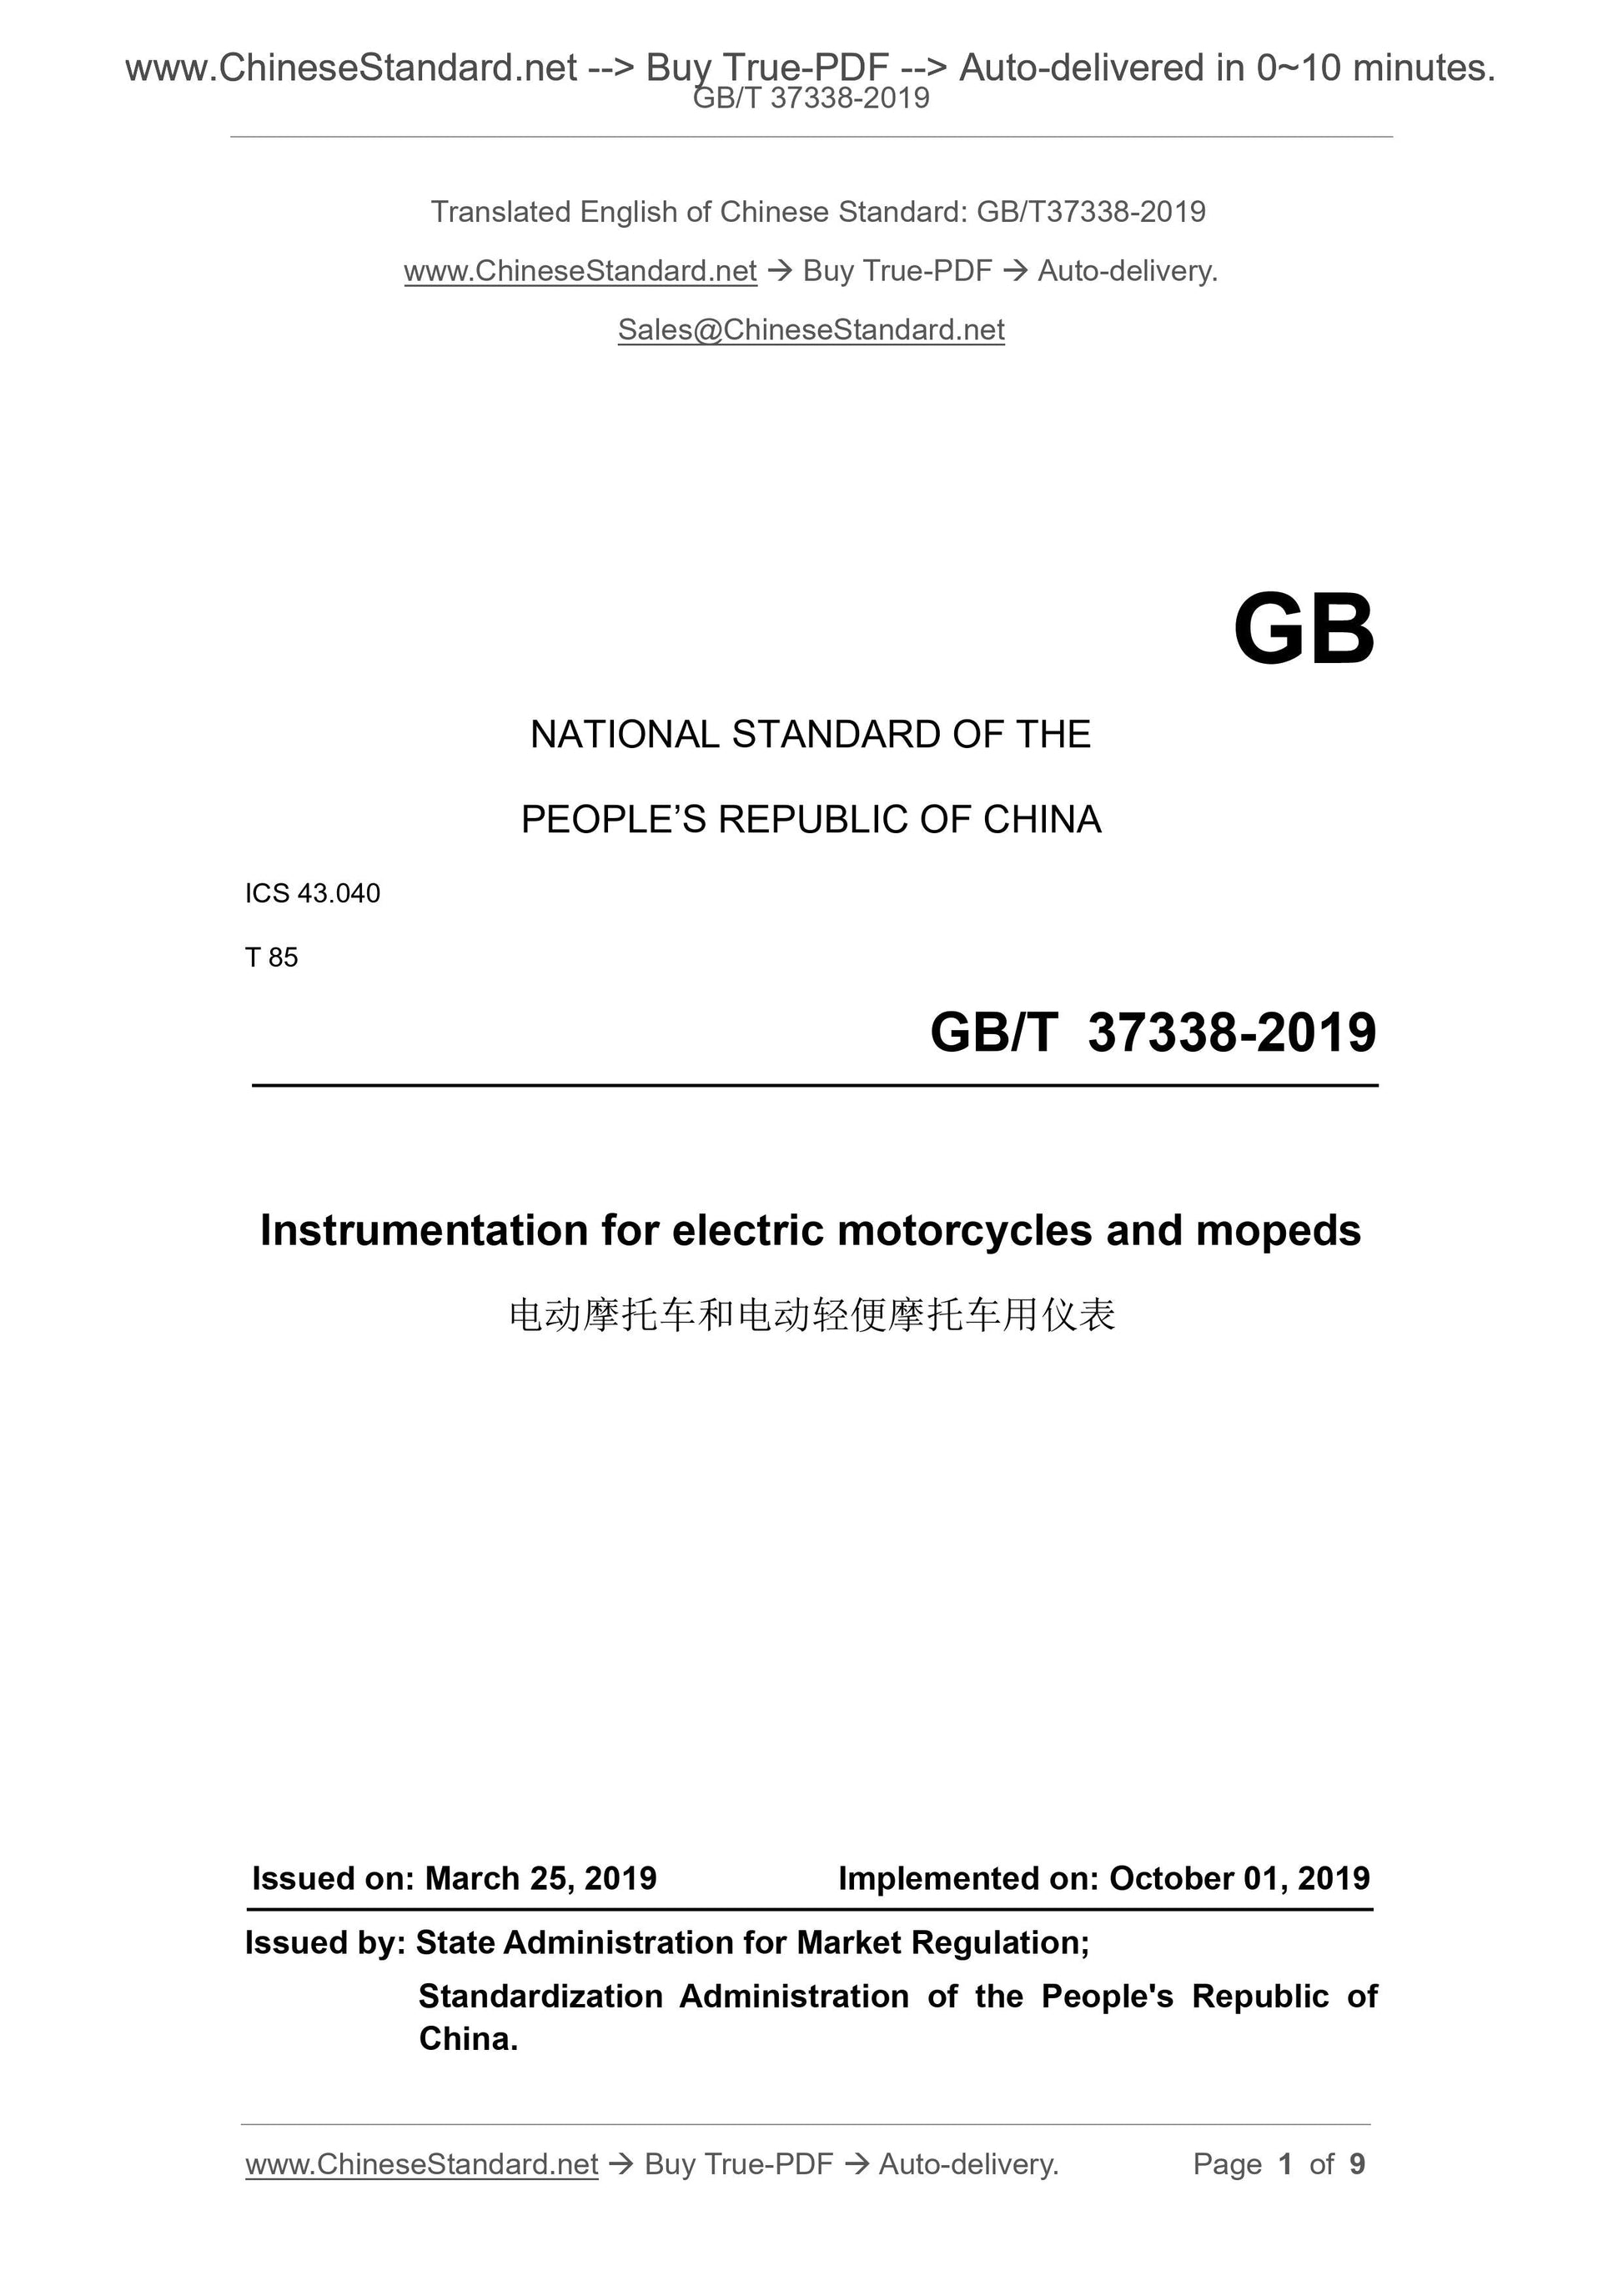 GB/T 37338-2019 Page 1